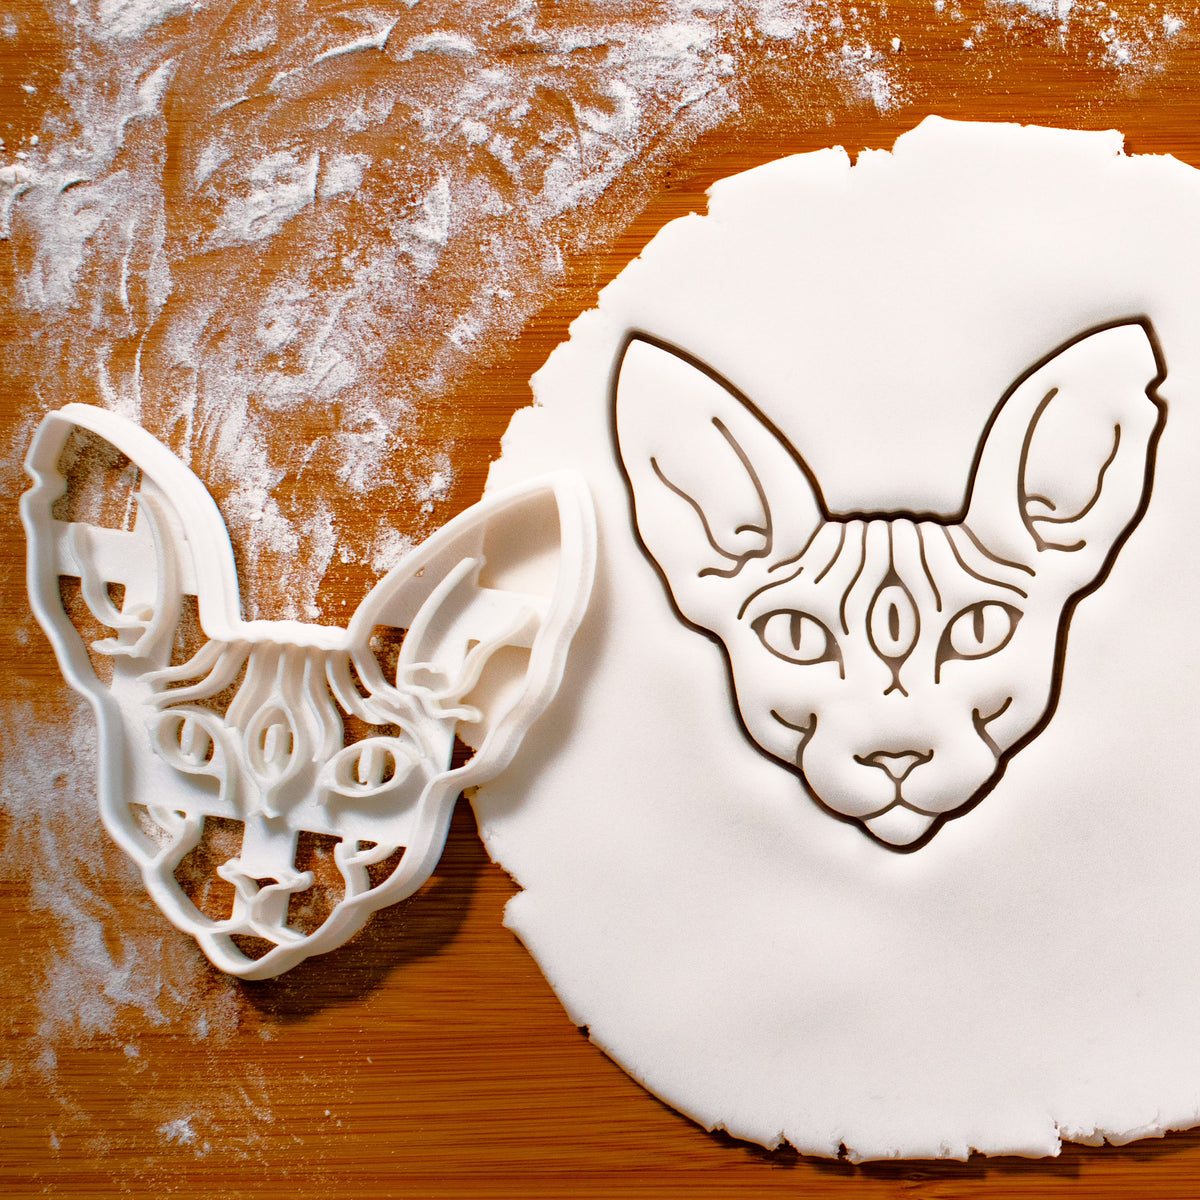 Sphynx Cat with 3rd Eye cookie cutter